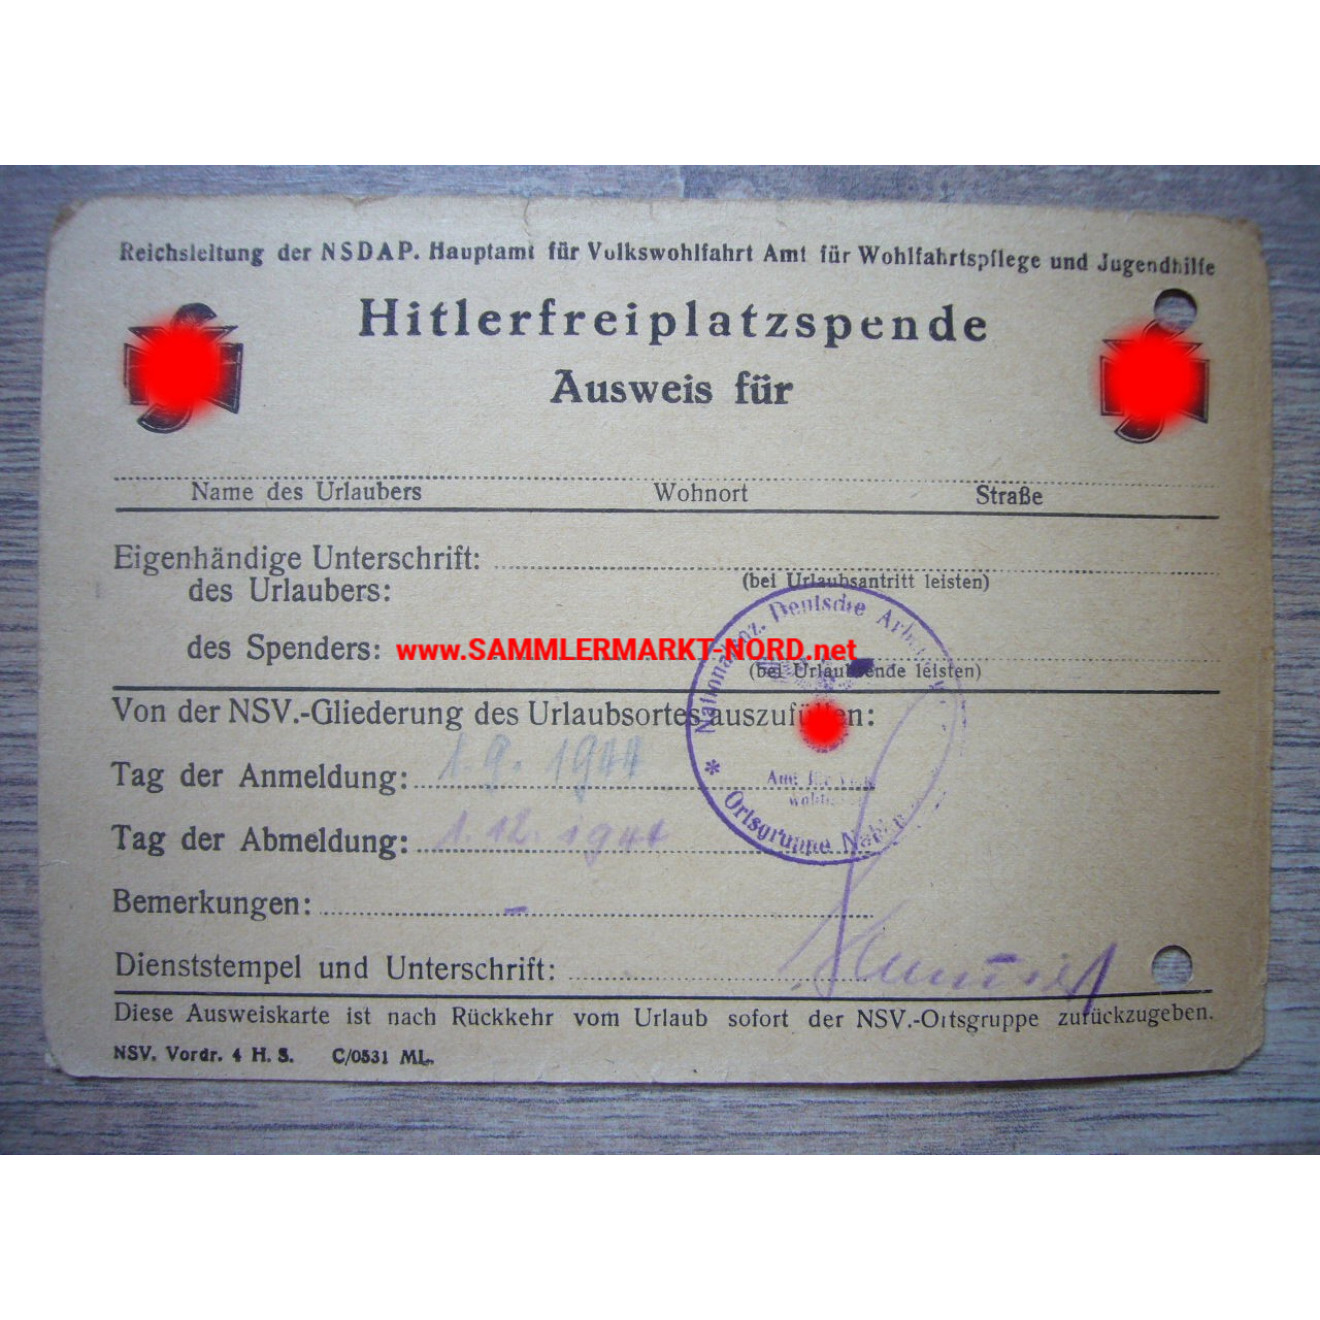 NSV - ID card for Hitler free space donation